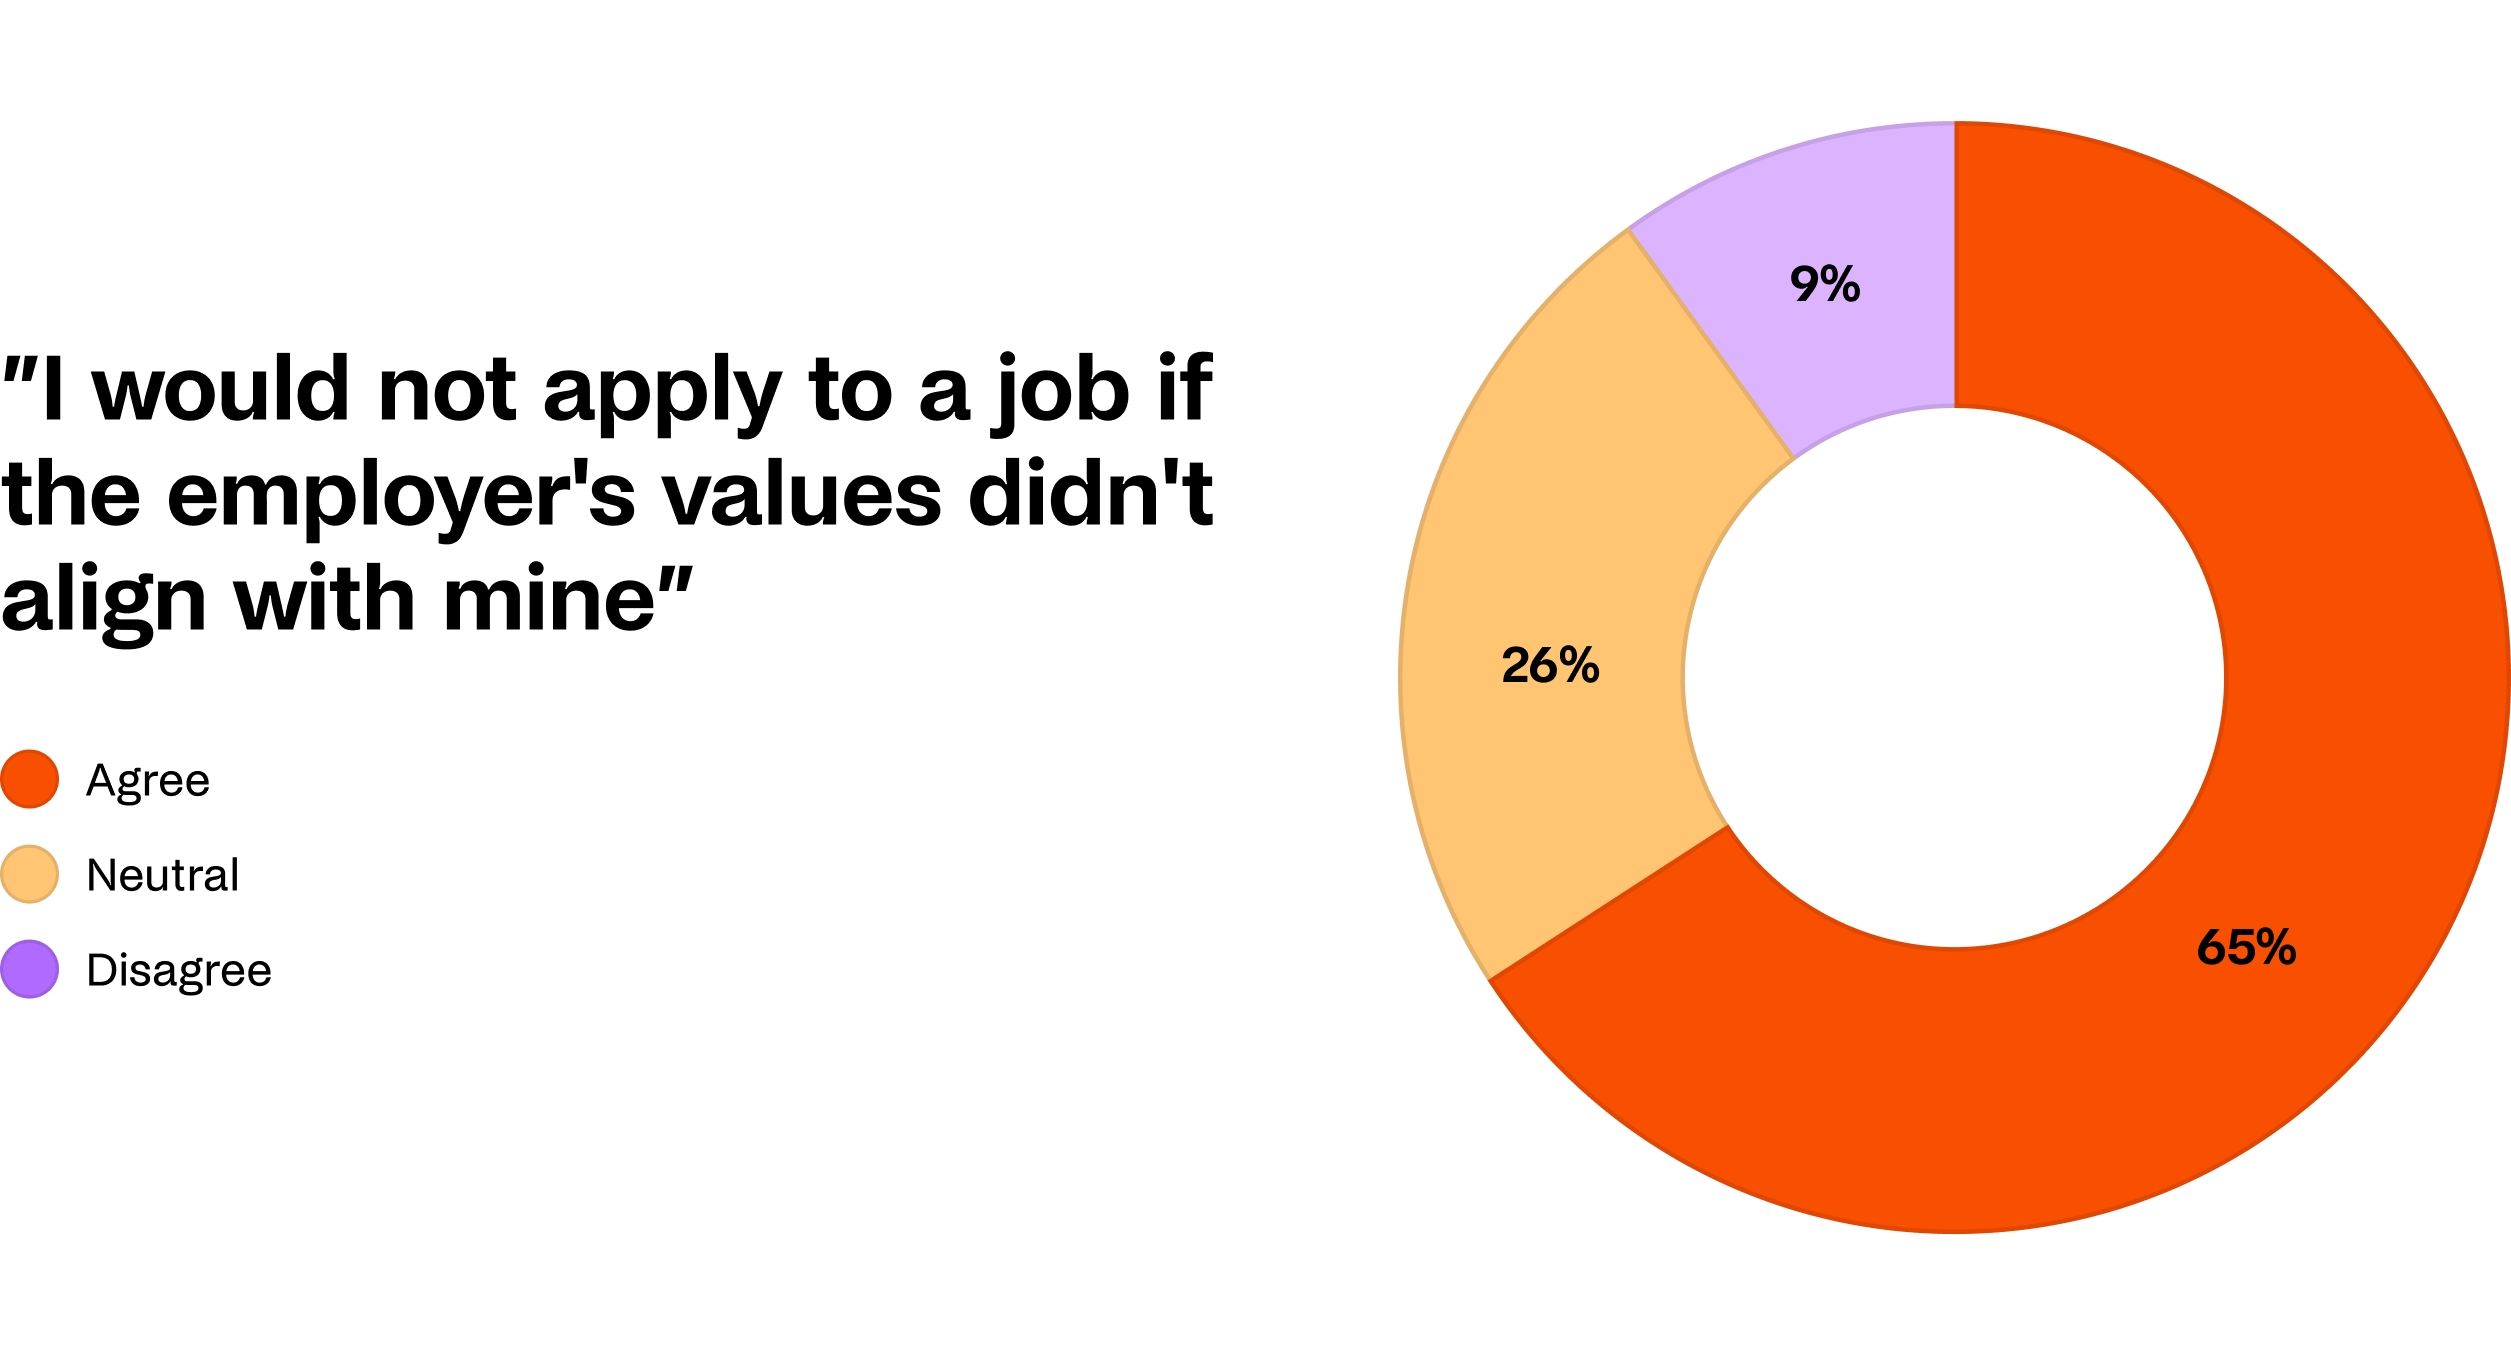 Chart: ”I would not apply to a job if the employer's values didn't align with mine”? 65% agree, 26% neutral, 9% disagree